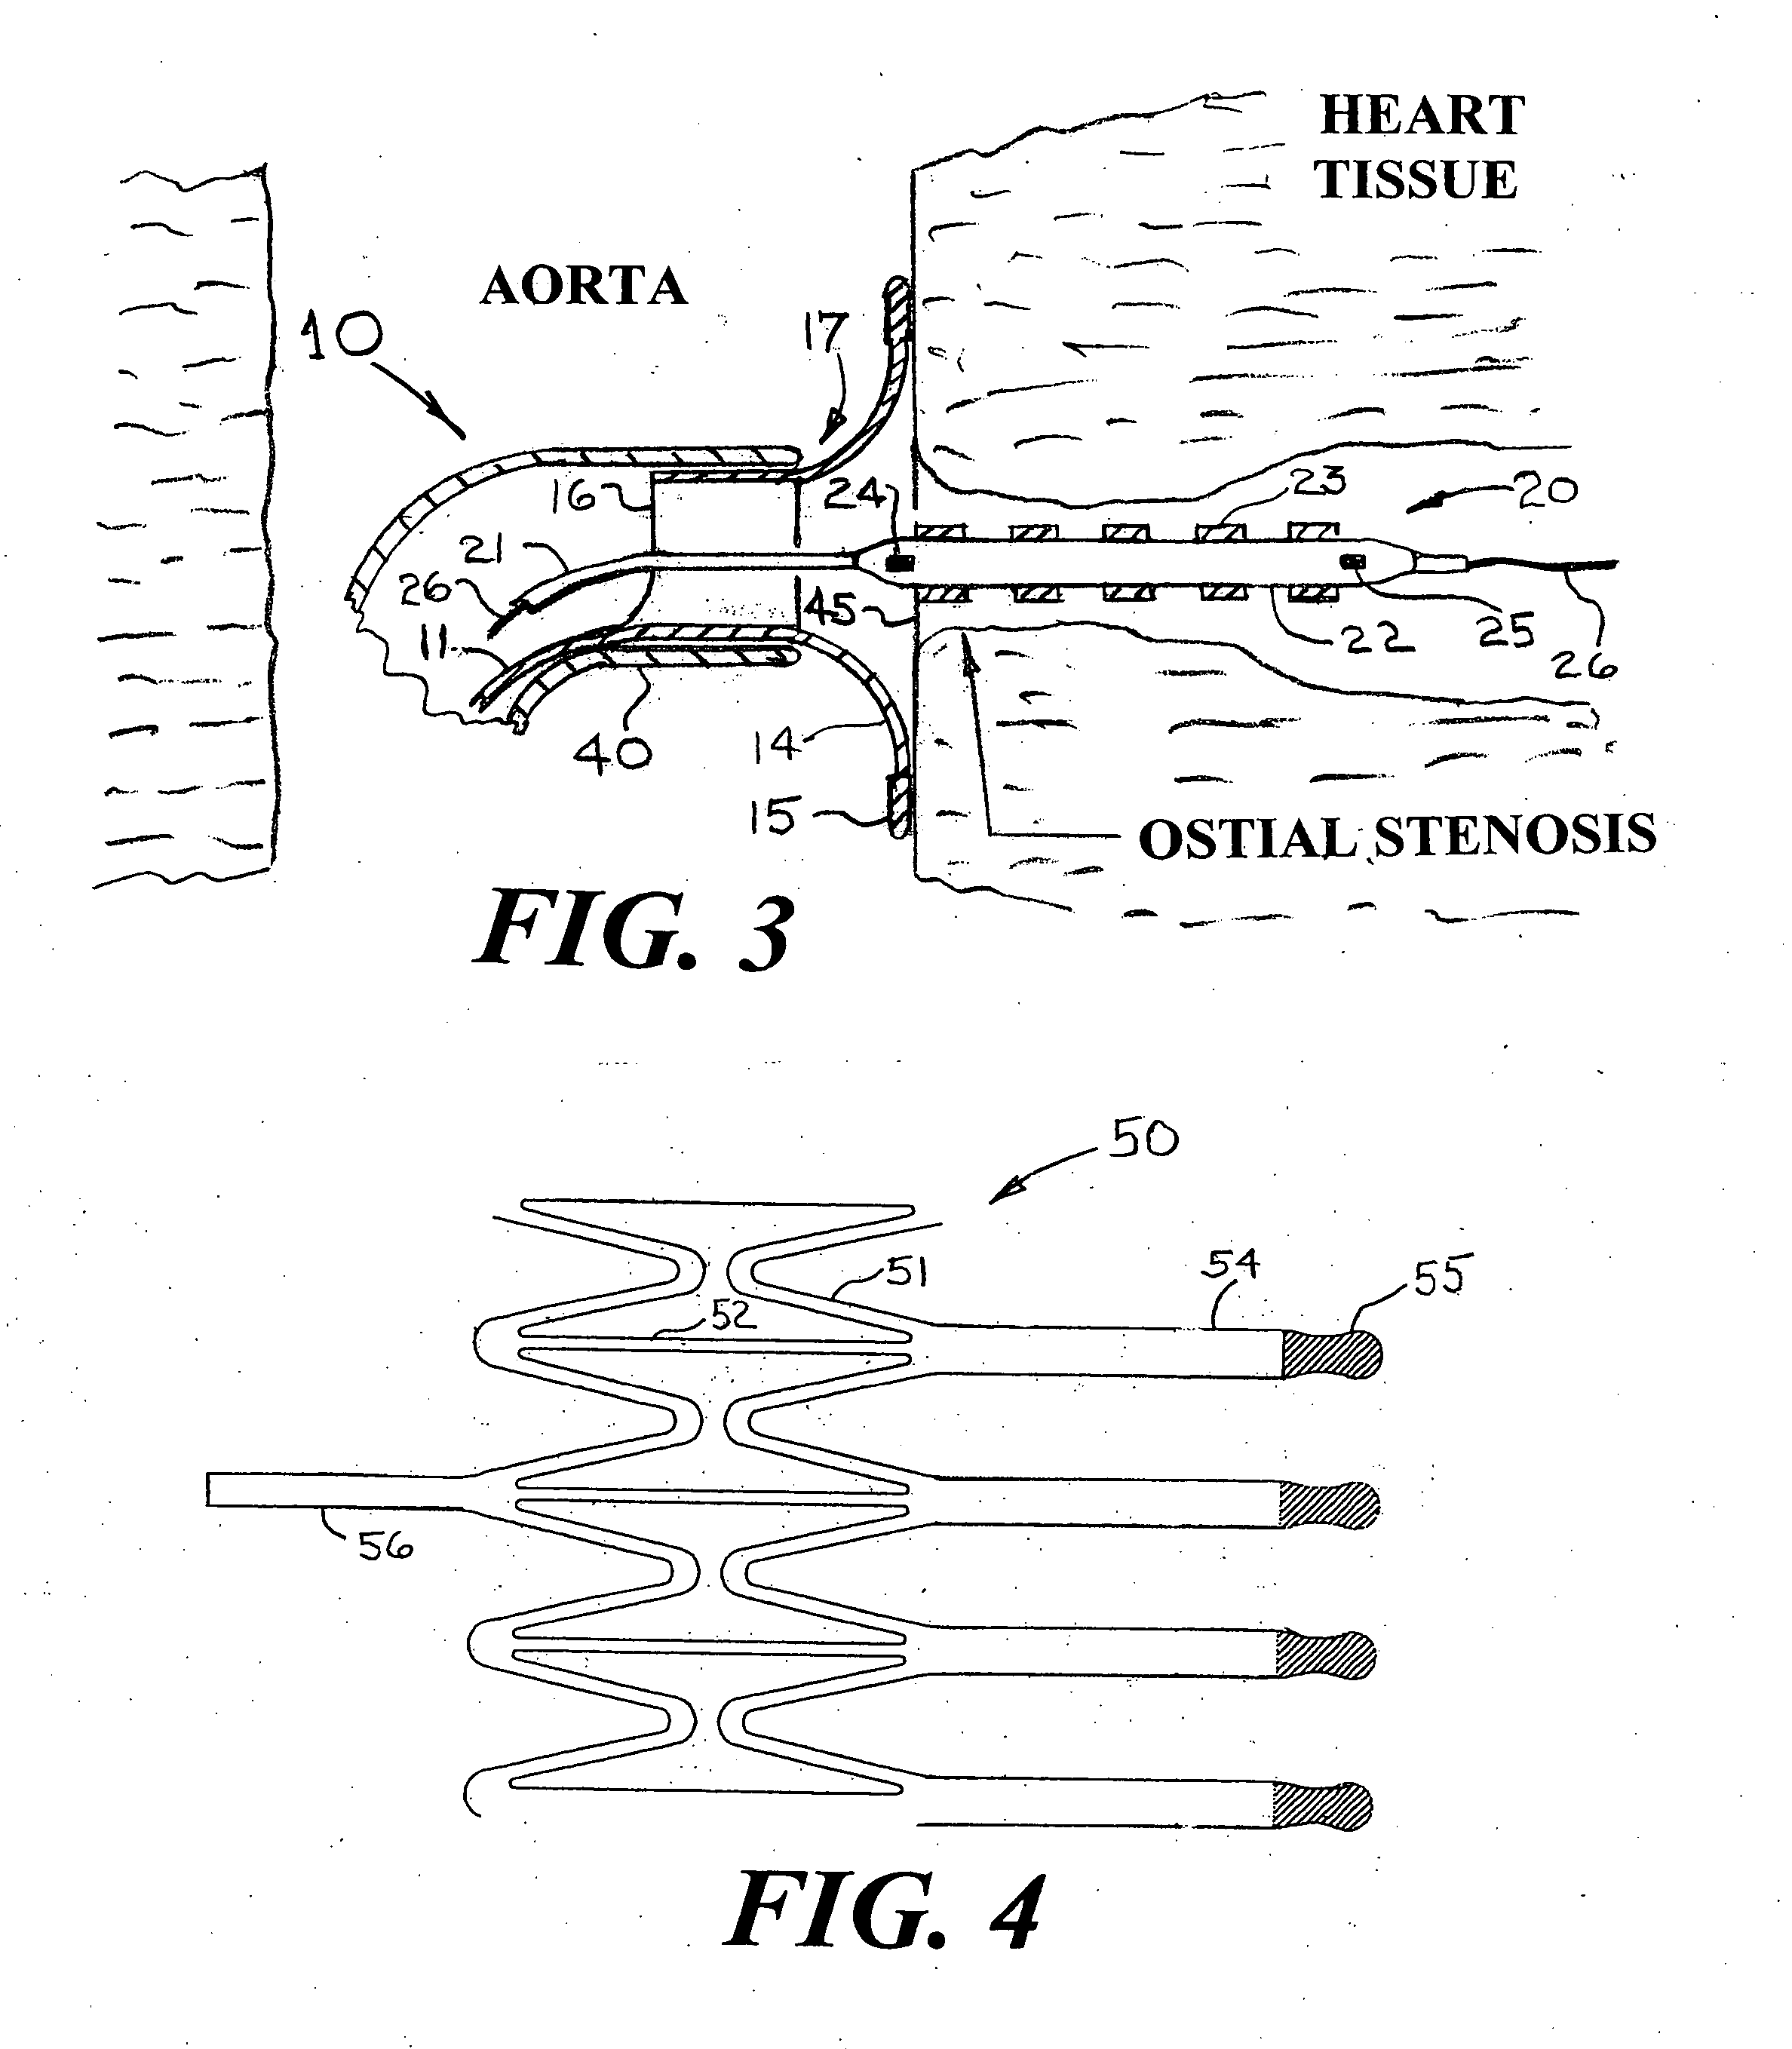 Device and method for placing a stent at the ostium of a blood vessel